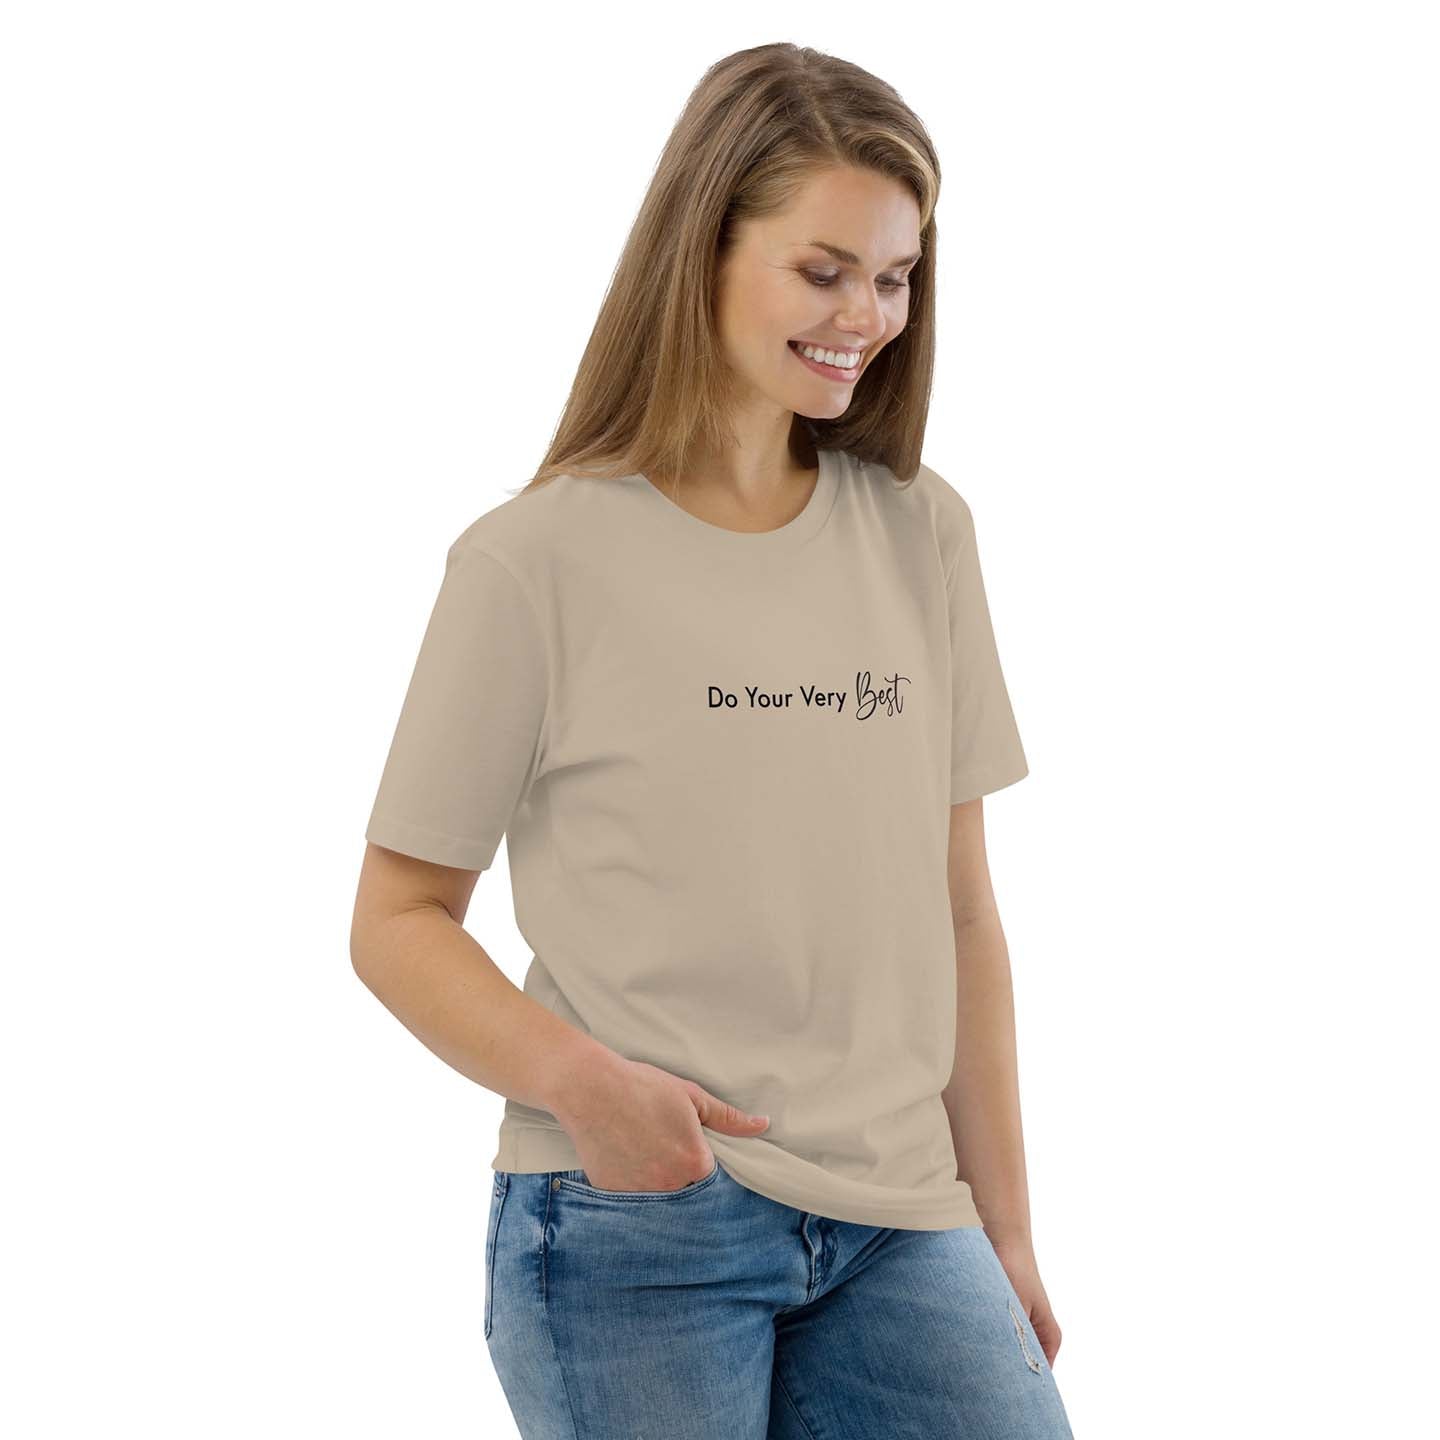 Women beige inspirational t-shirt with motivational quote, "Do Your Very Best."